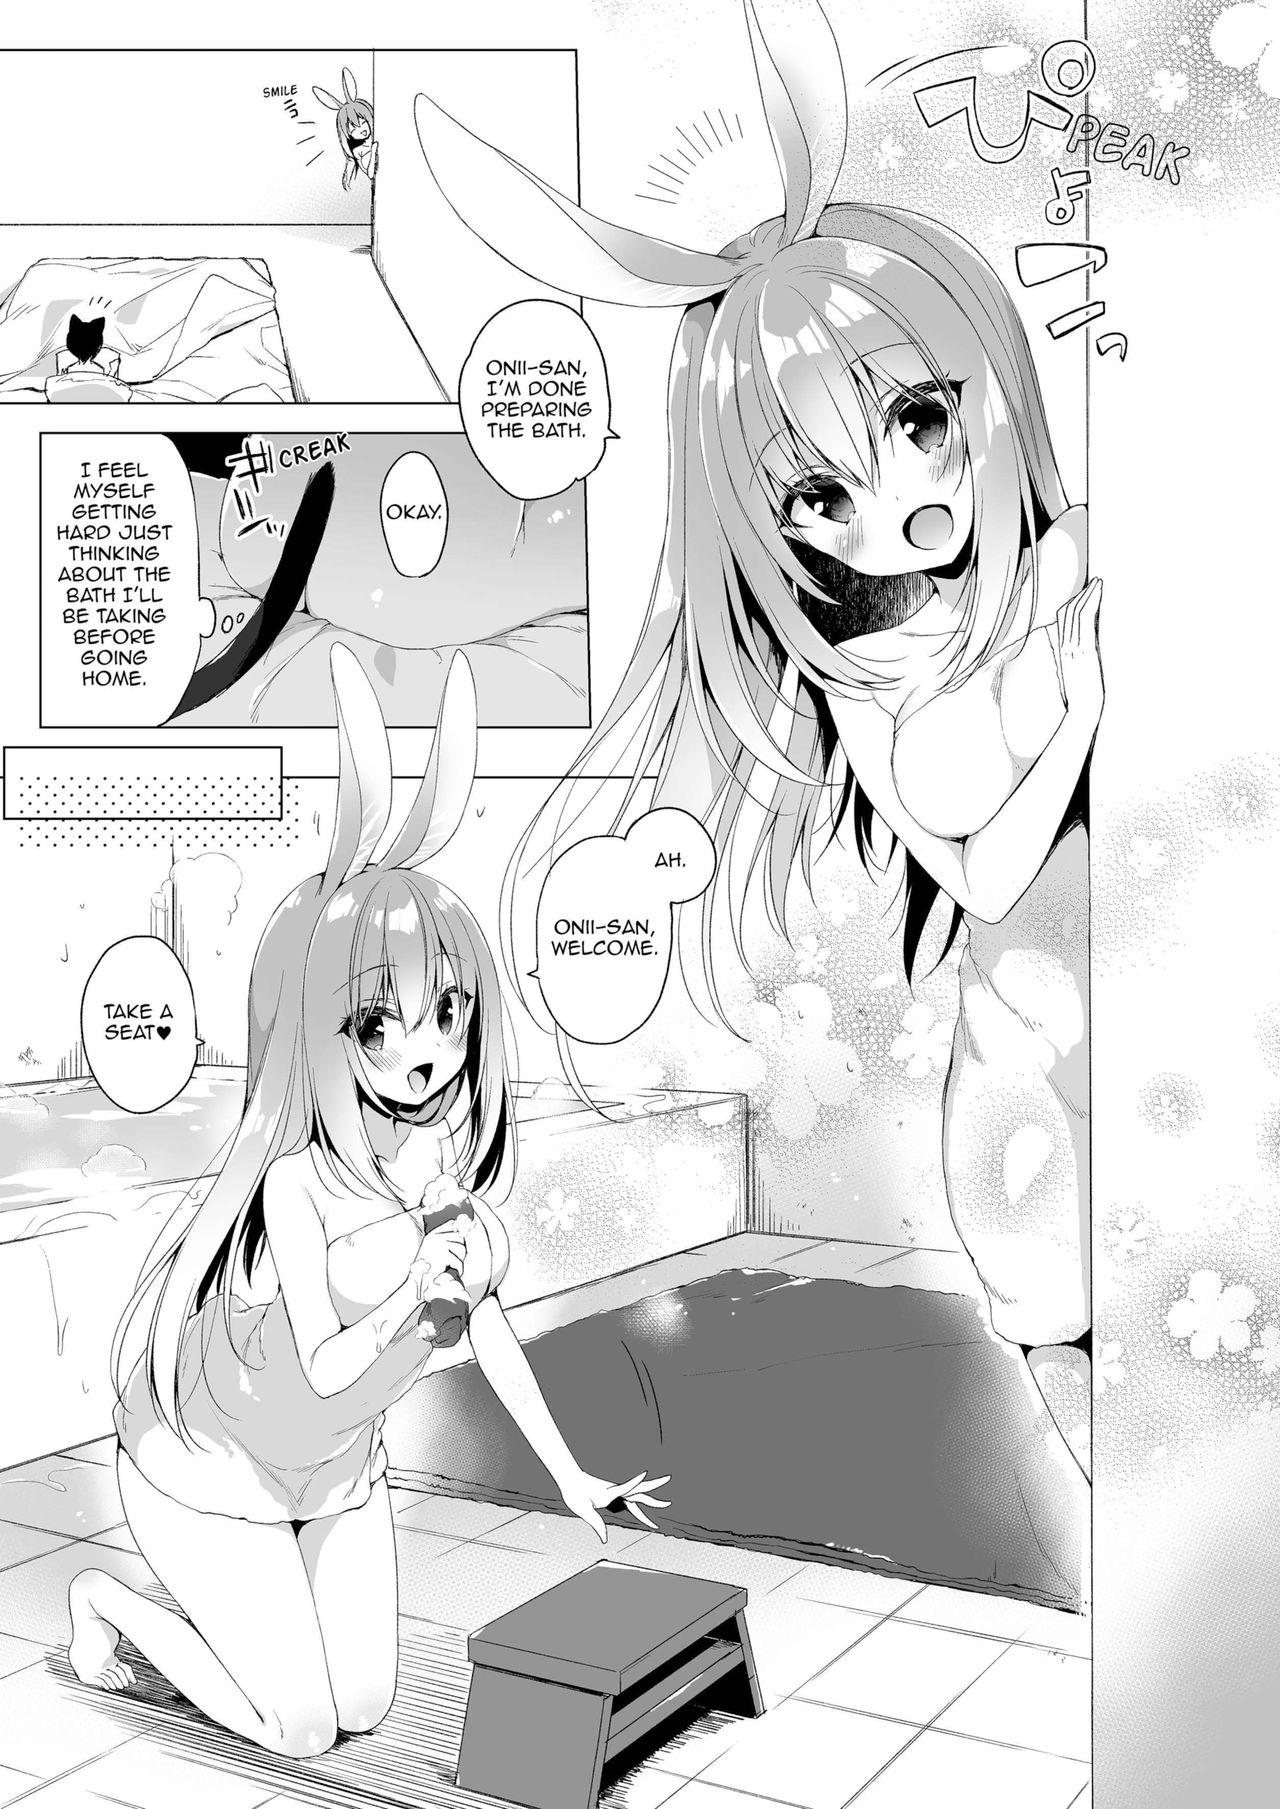 Spreading My Ideal Life in Another World Vol. 6.5 Cam Girl - Page 4